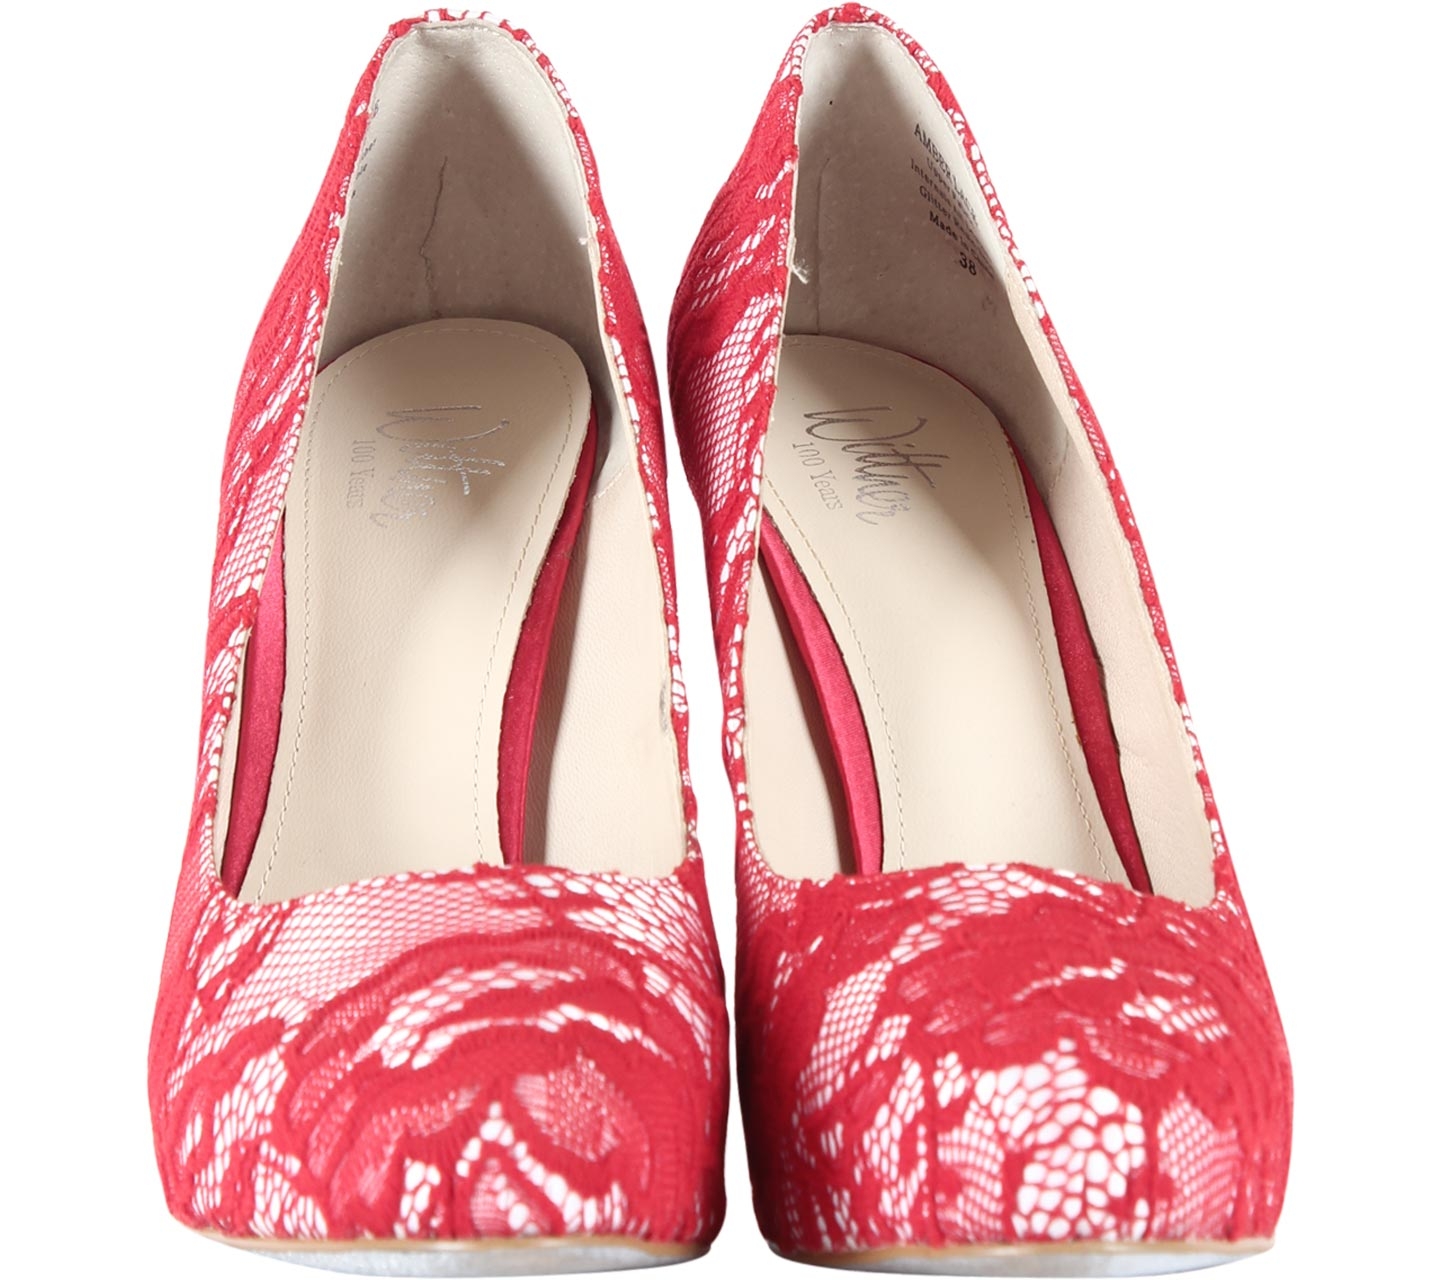 Wittner Red Lace Heels